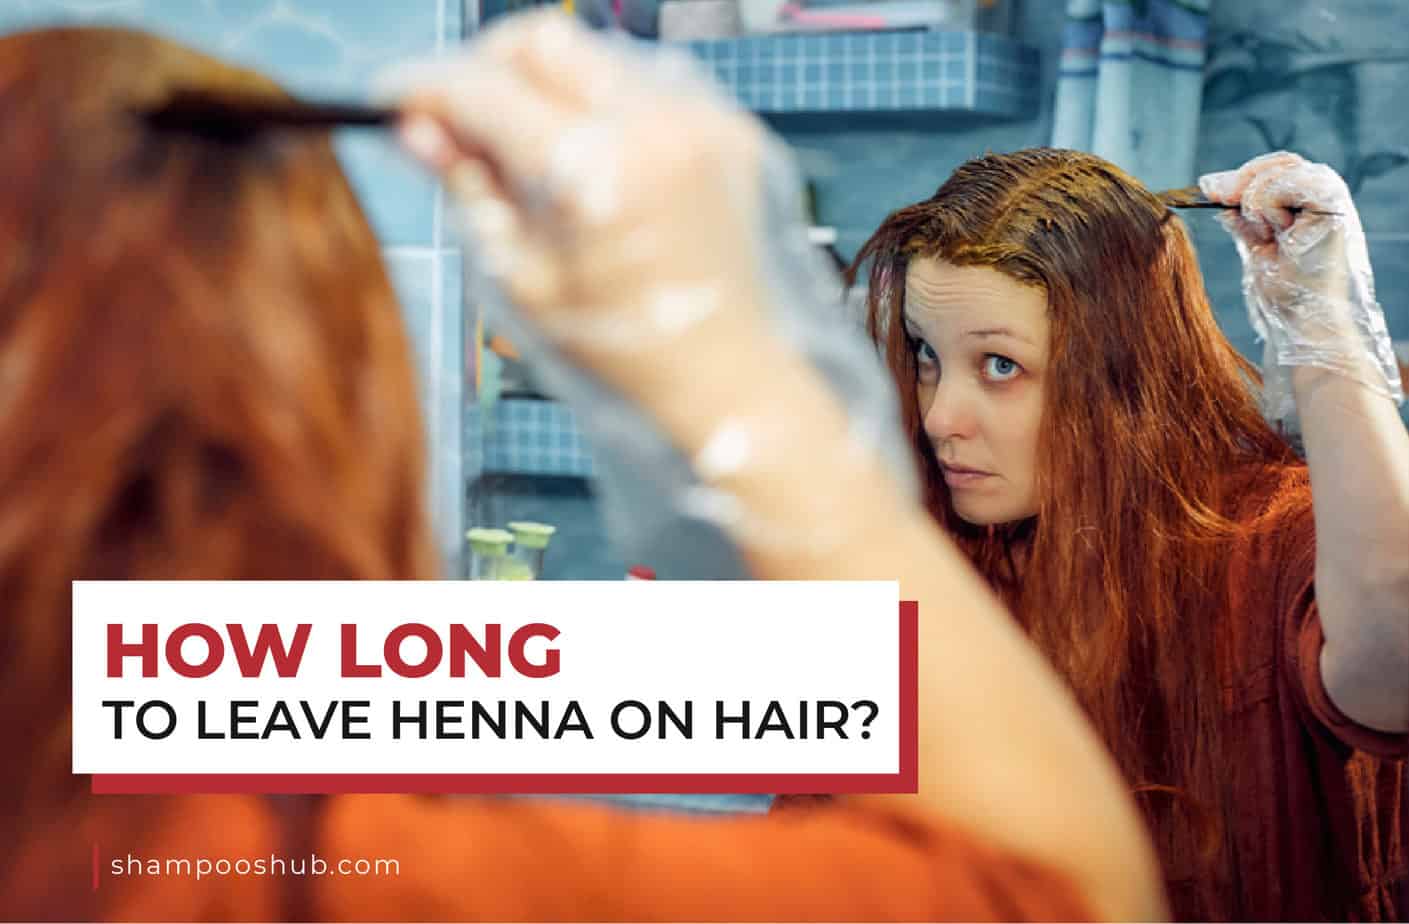 How Long To Leave Henna On Hair?